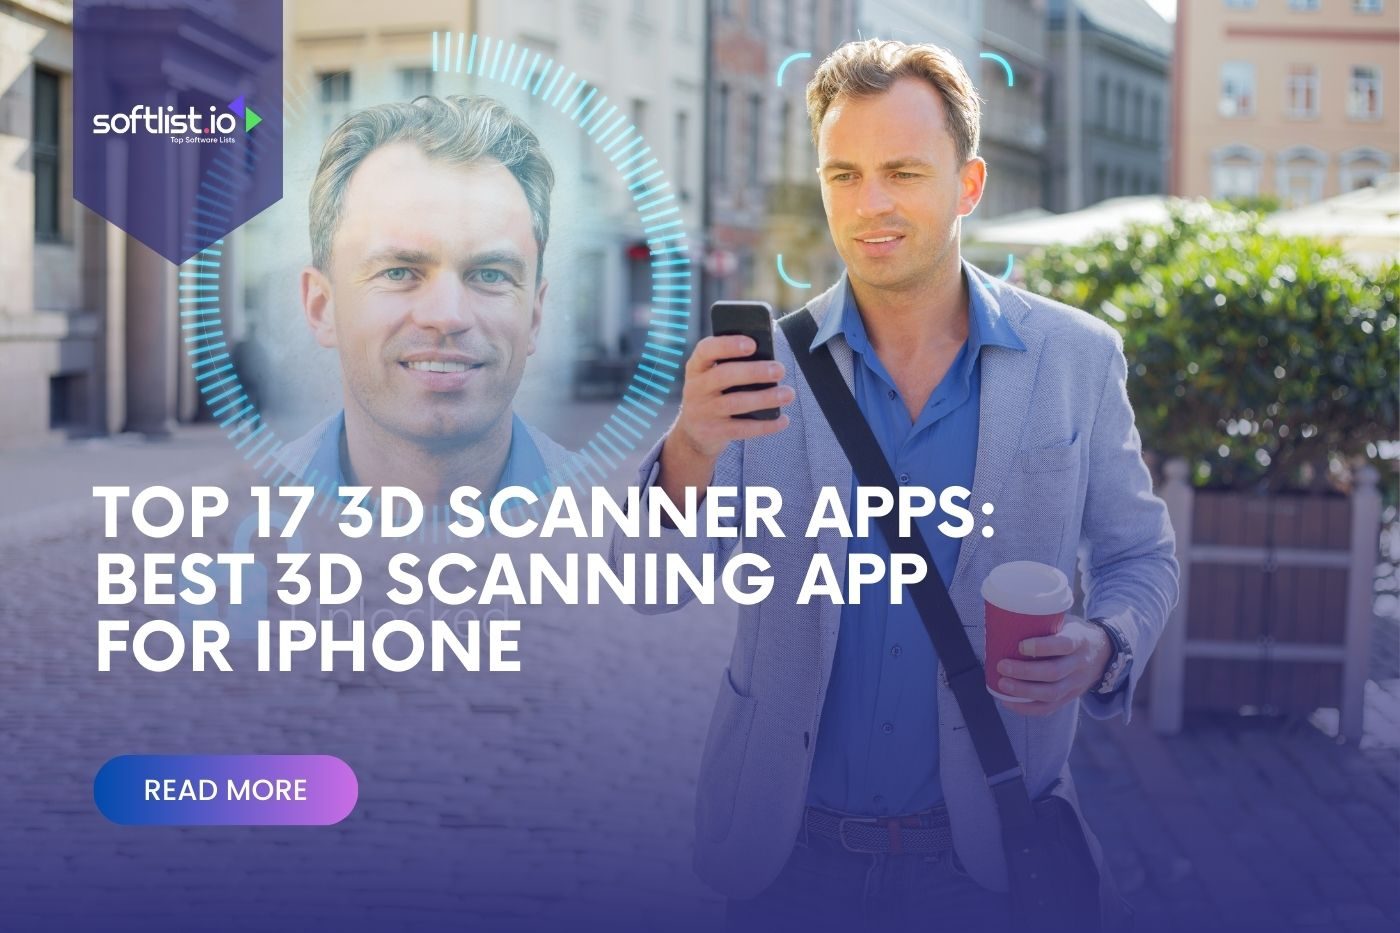 Top 17 3D Scanner Apps for iPhone and Android